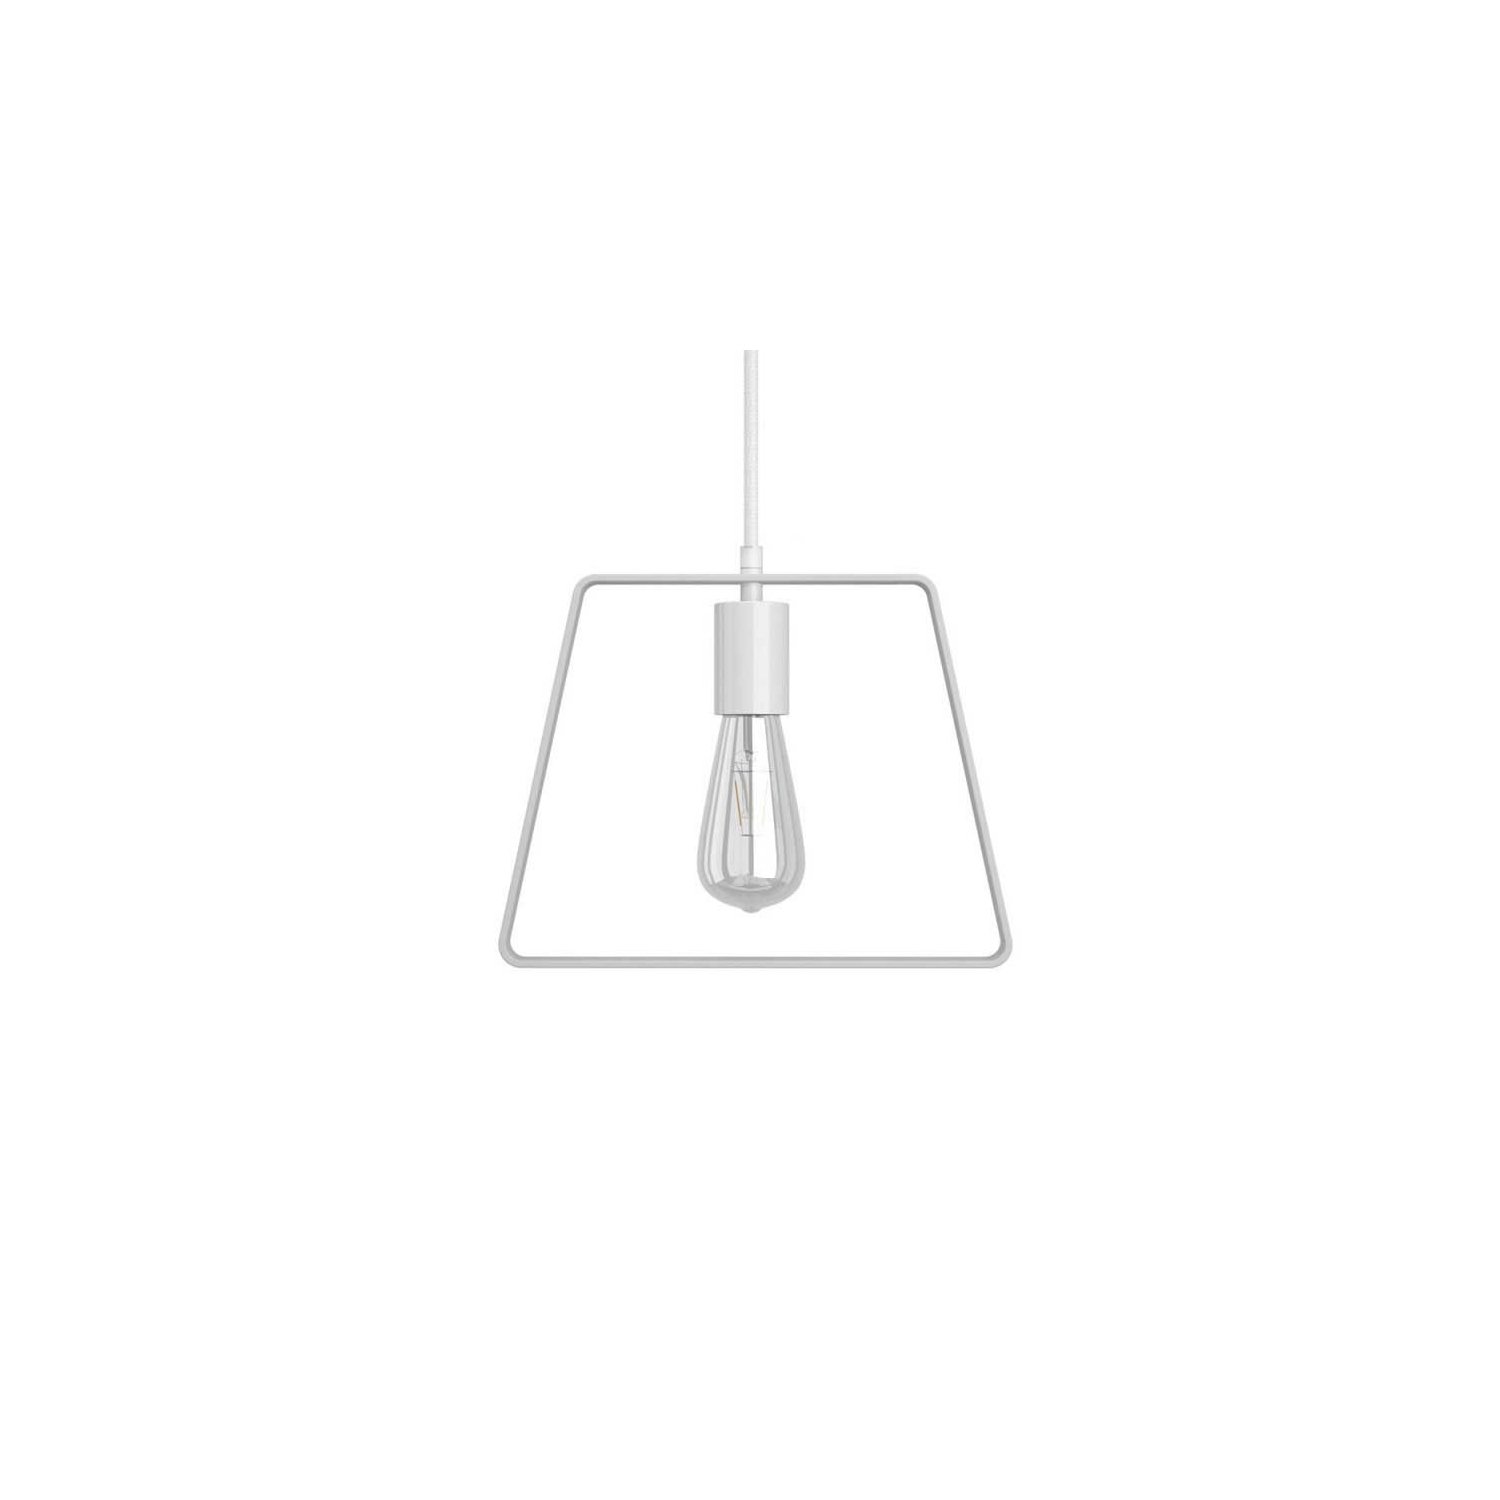 Pendant lamp with textile cable, Duedì Base lampshade and metal details